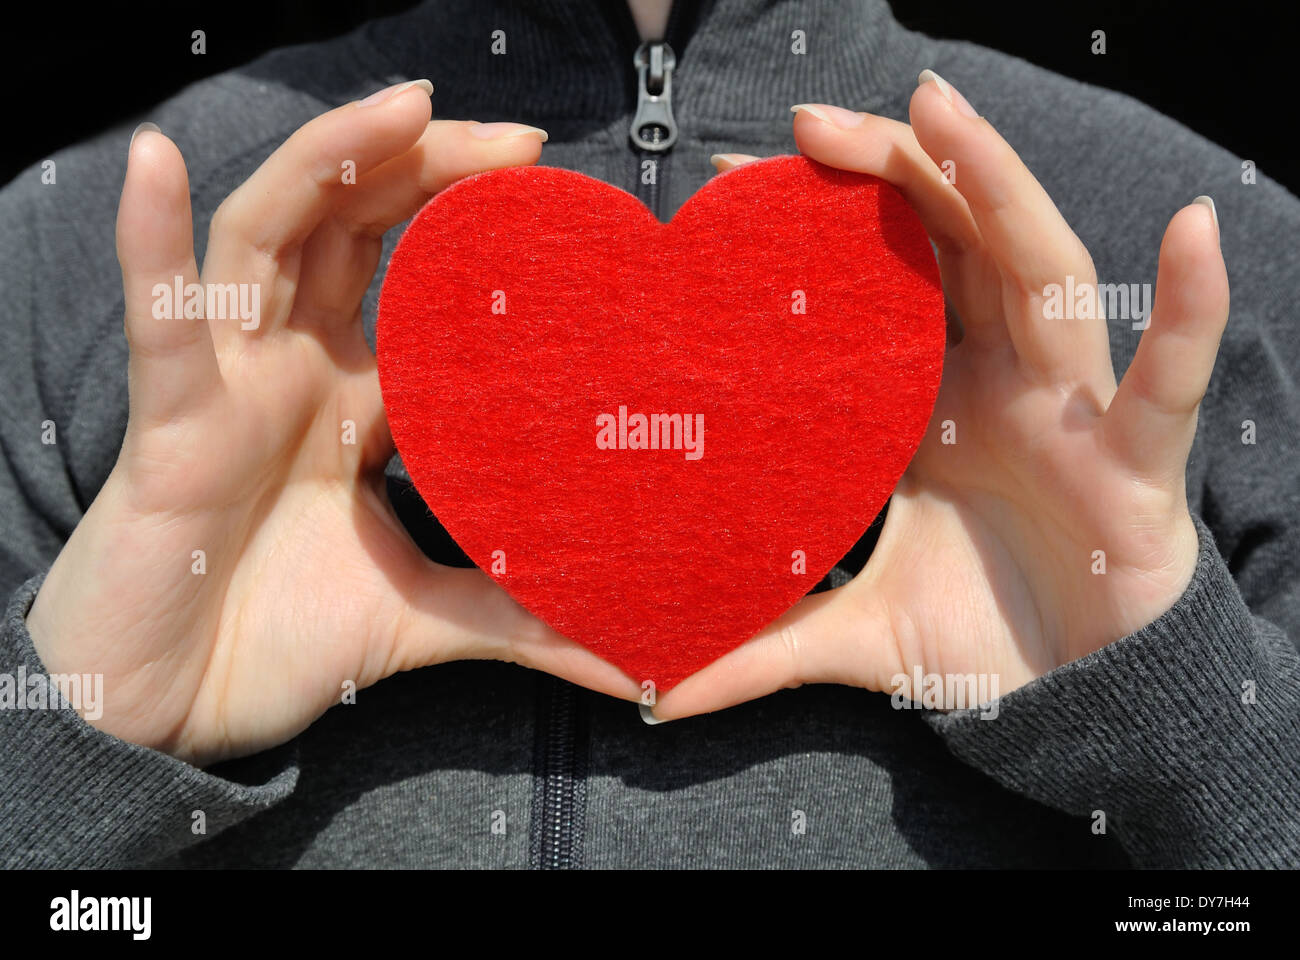 Girl with a red heart in her hand Stock Photo